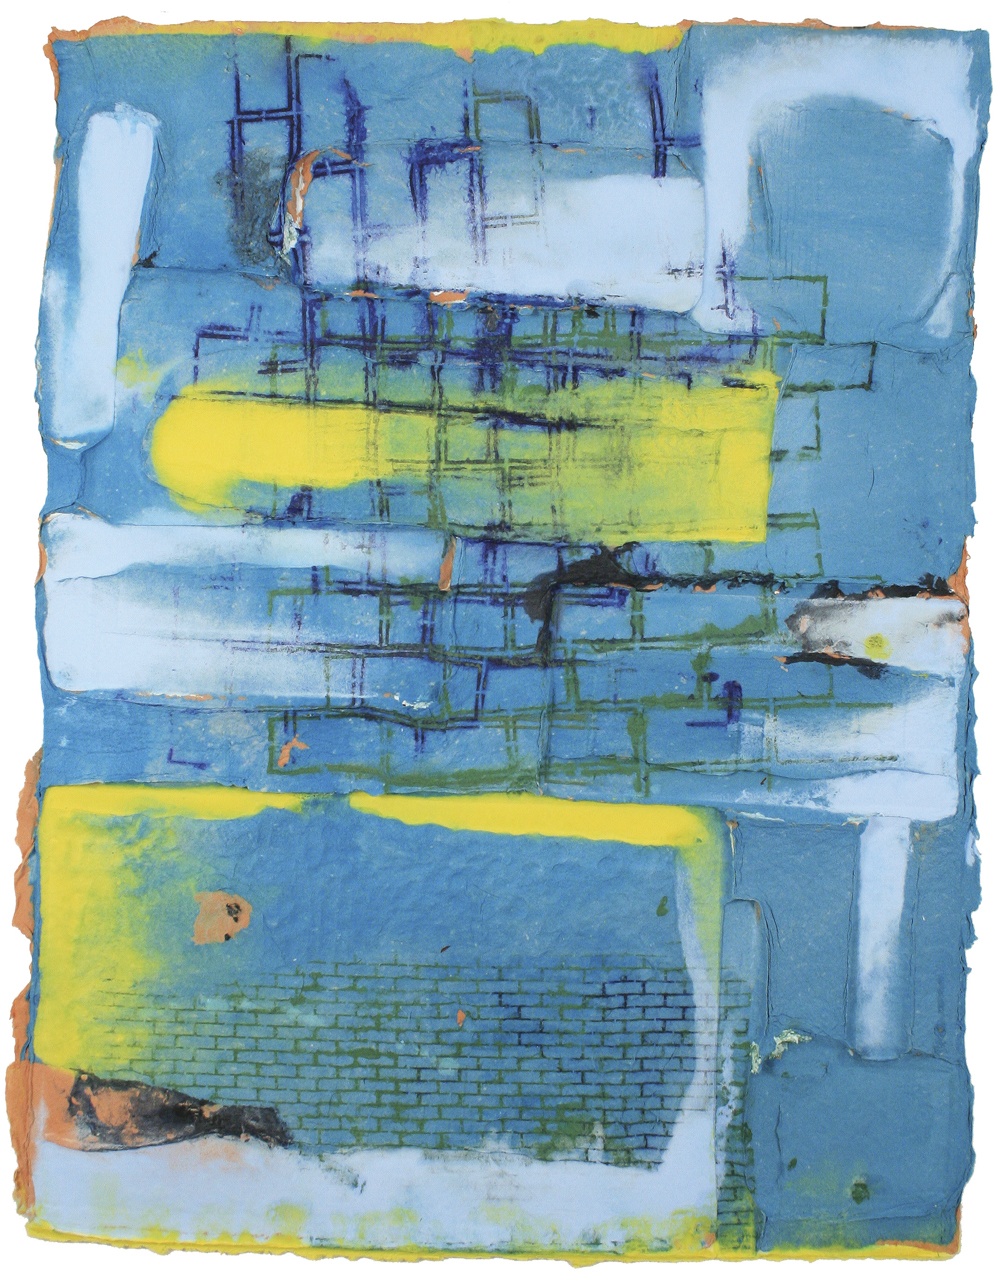 An abstract painting in blue and yellow with brick patterns throughout